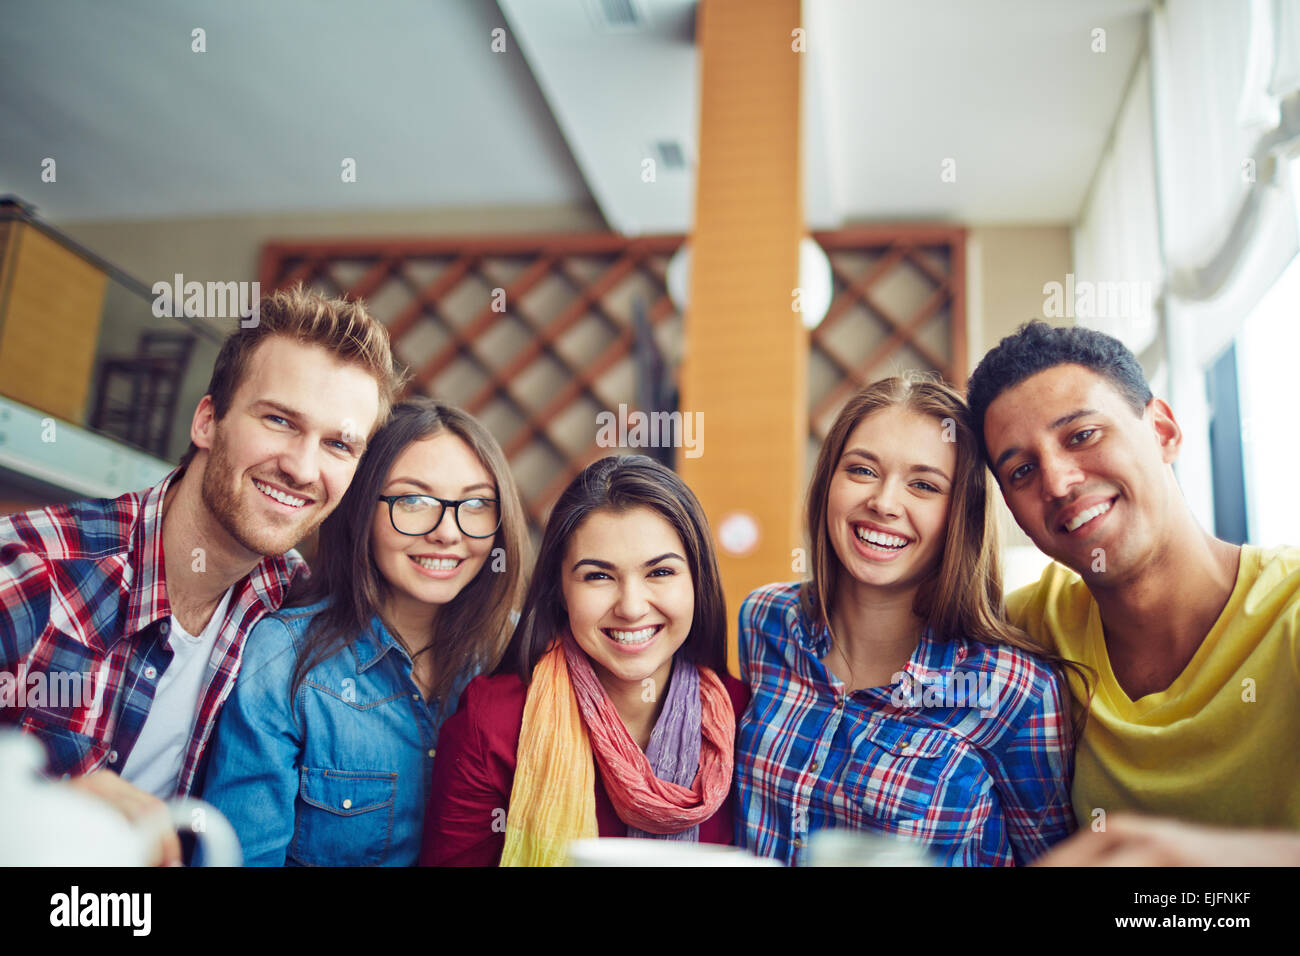 Five friendly young people looking at camera Stock Photo